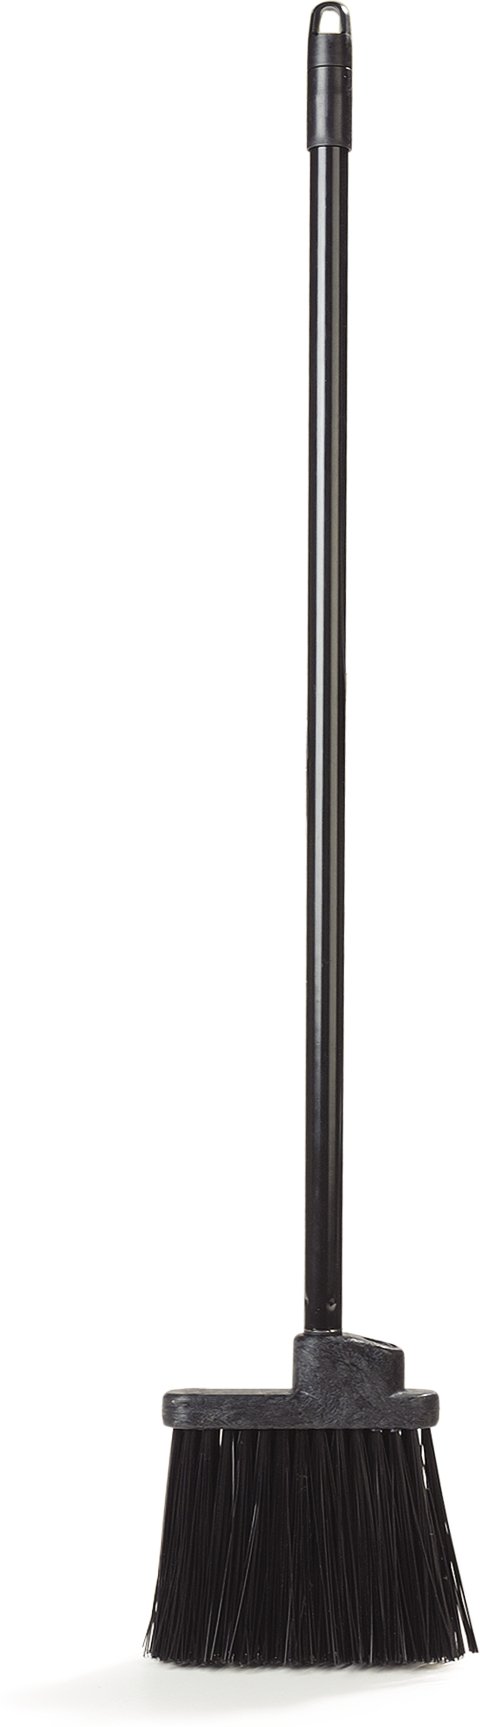 Carlisle | Duo Sweep® 30" Lobby Broom With Black Metal Threaded Handle - 36860 03 | Kitchen Equipped